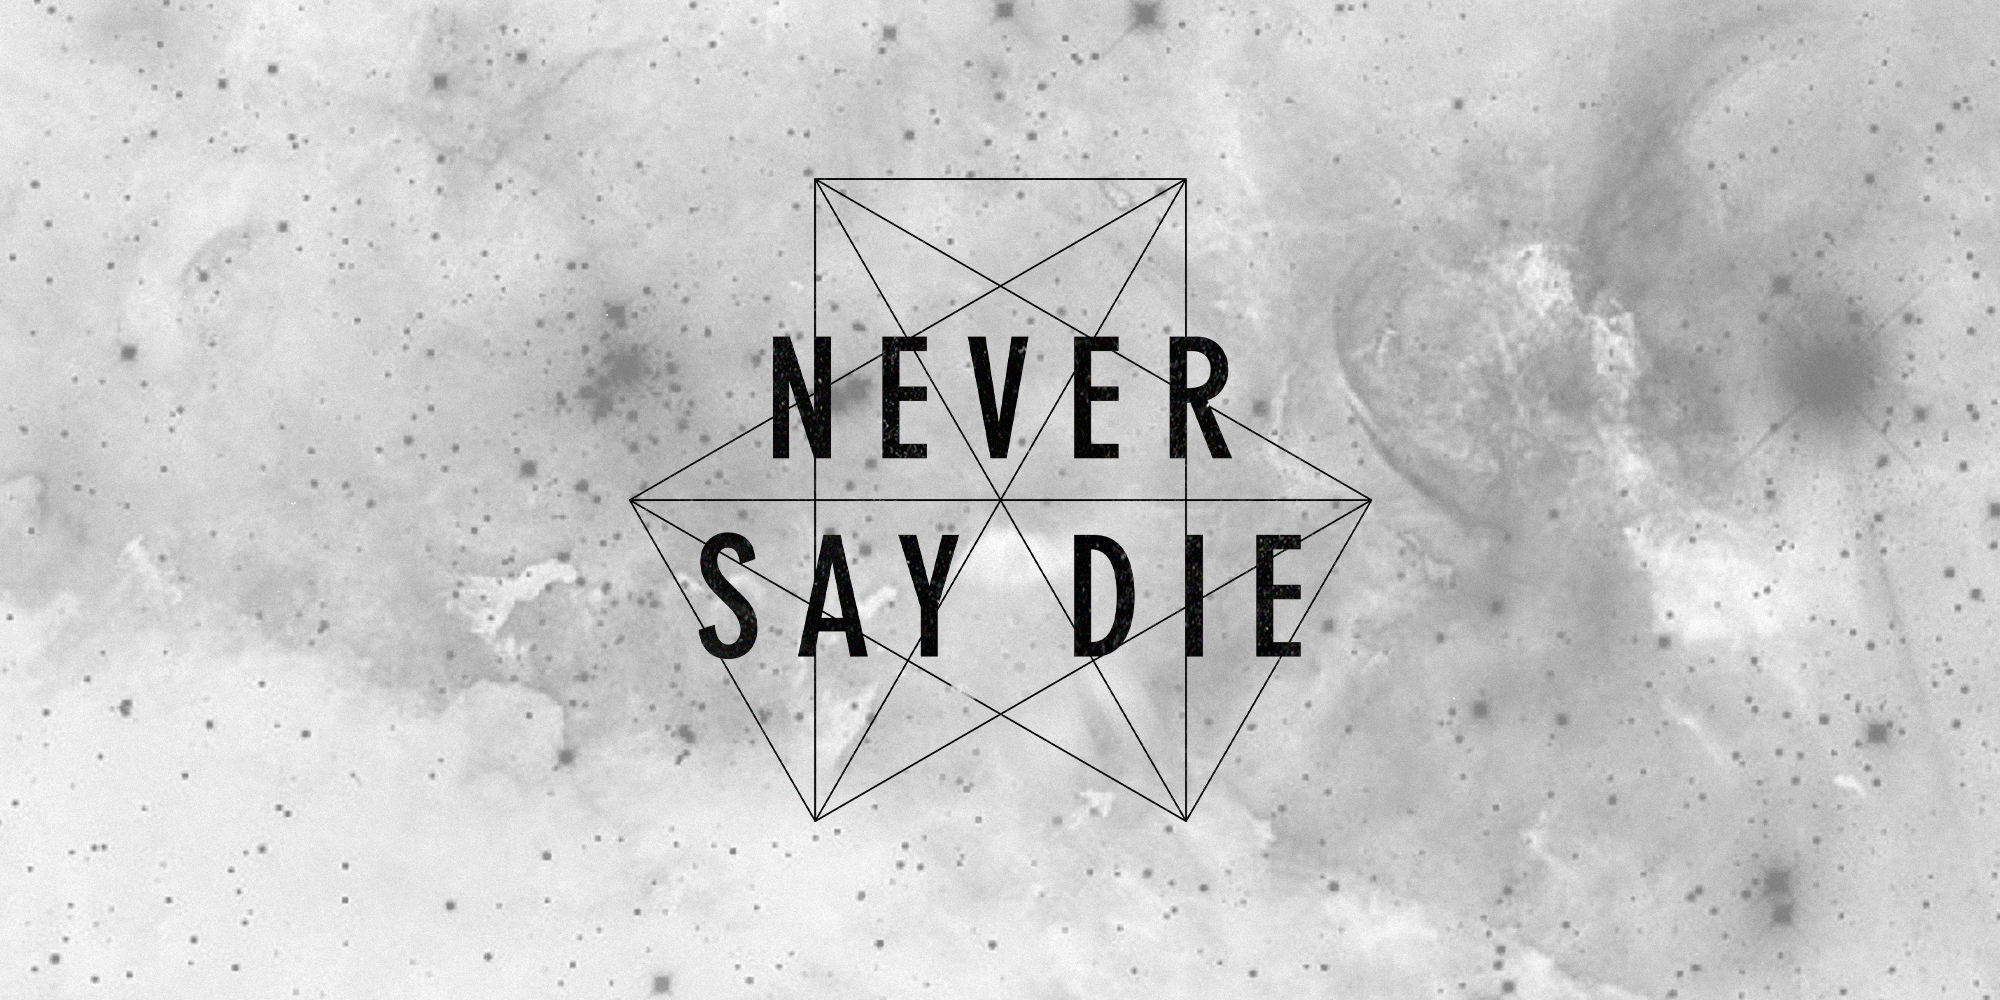 Have a never be the say